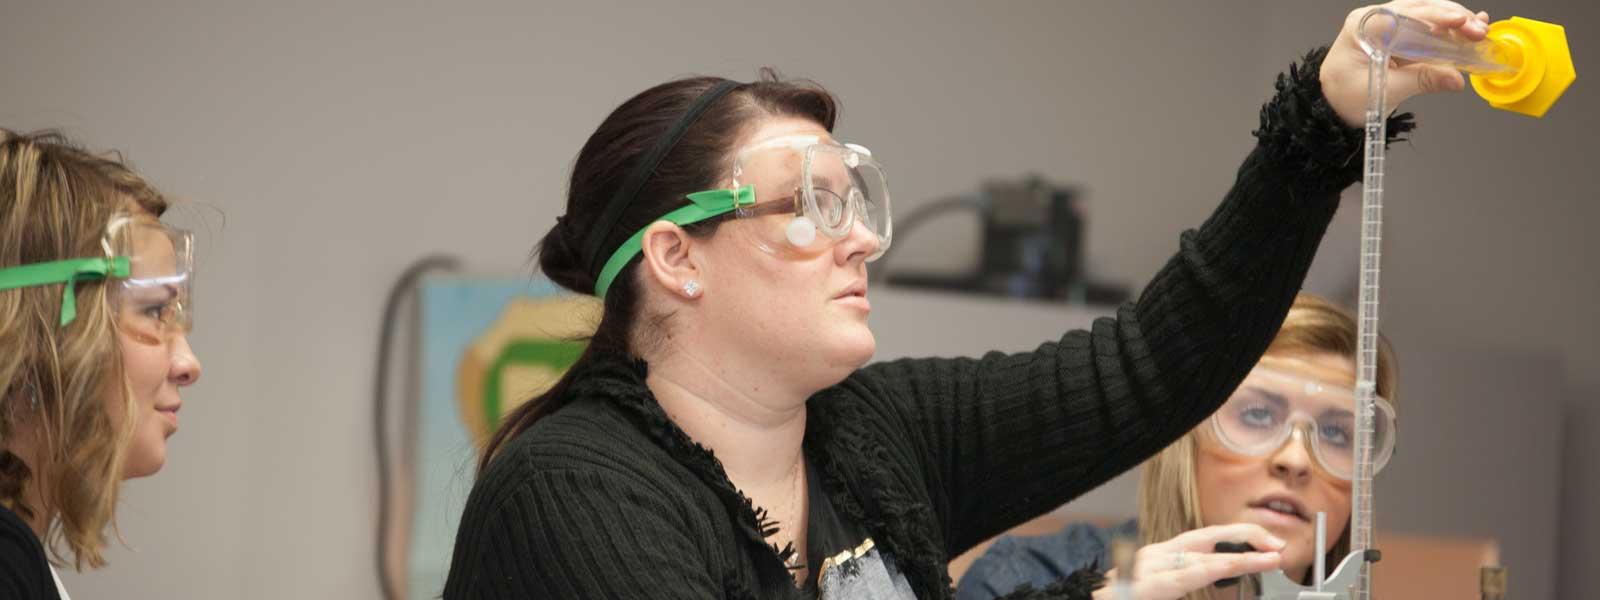 student works on chemistry experiment wearing goggles